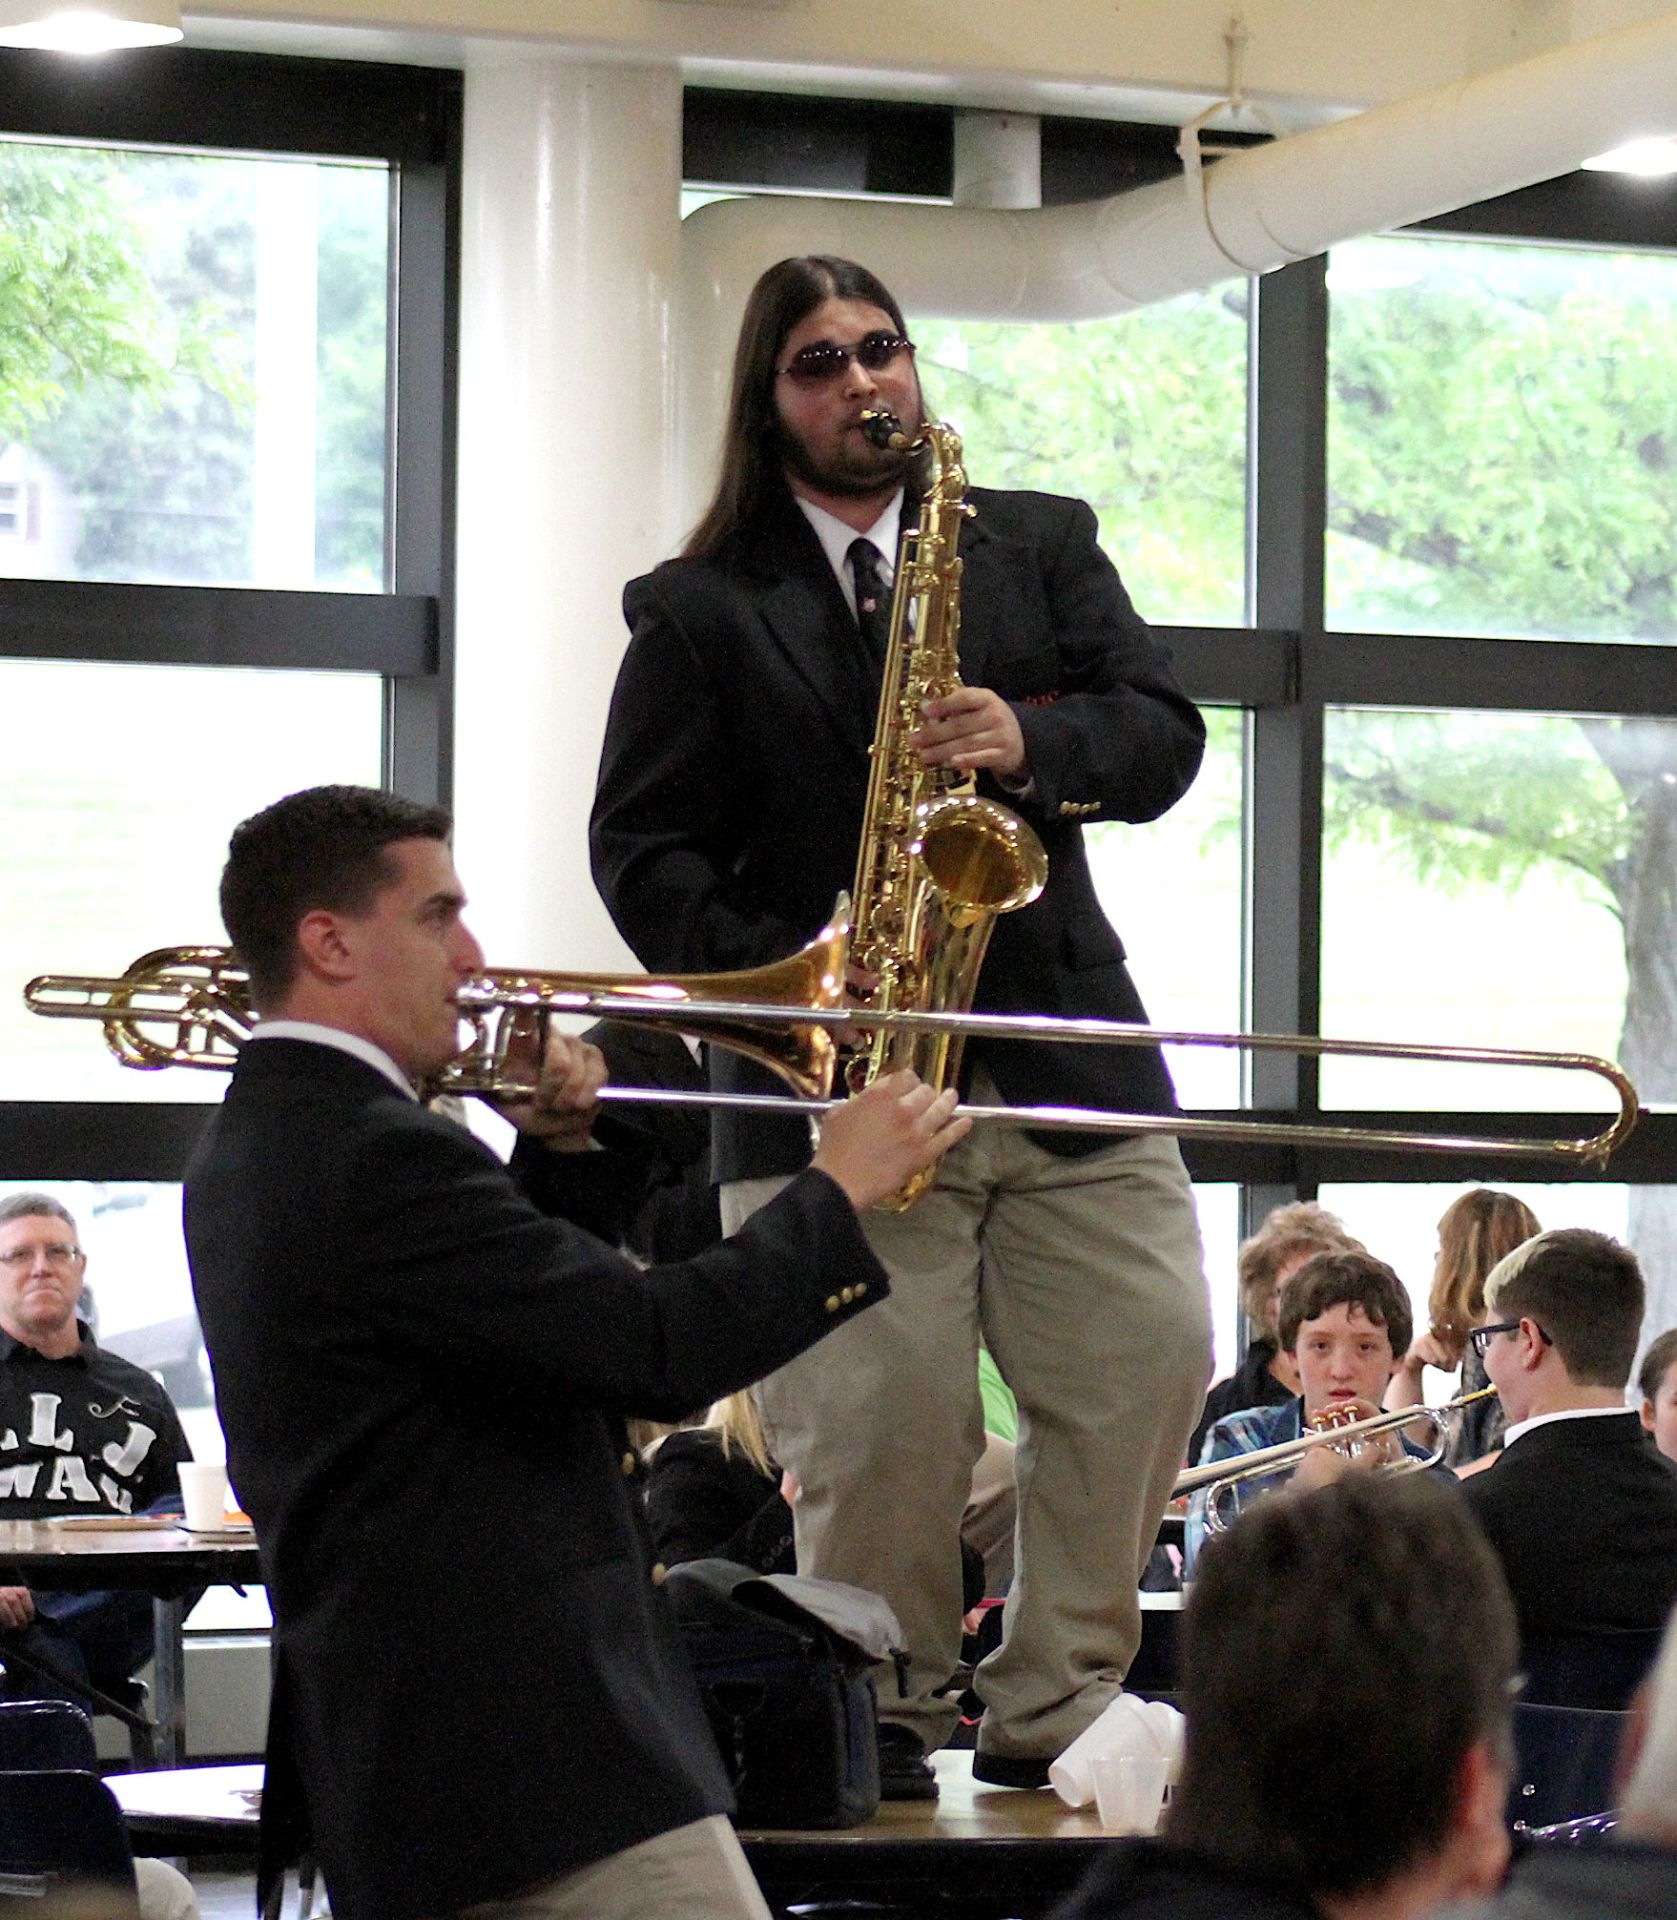 Noah Brant standing on table playing saxophone with trombonist and audience members